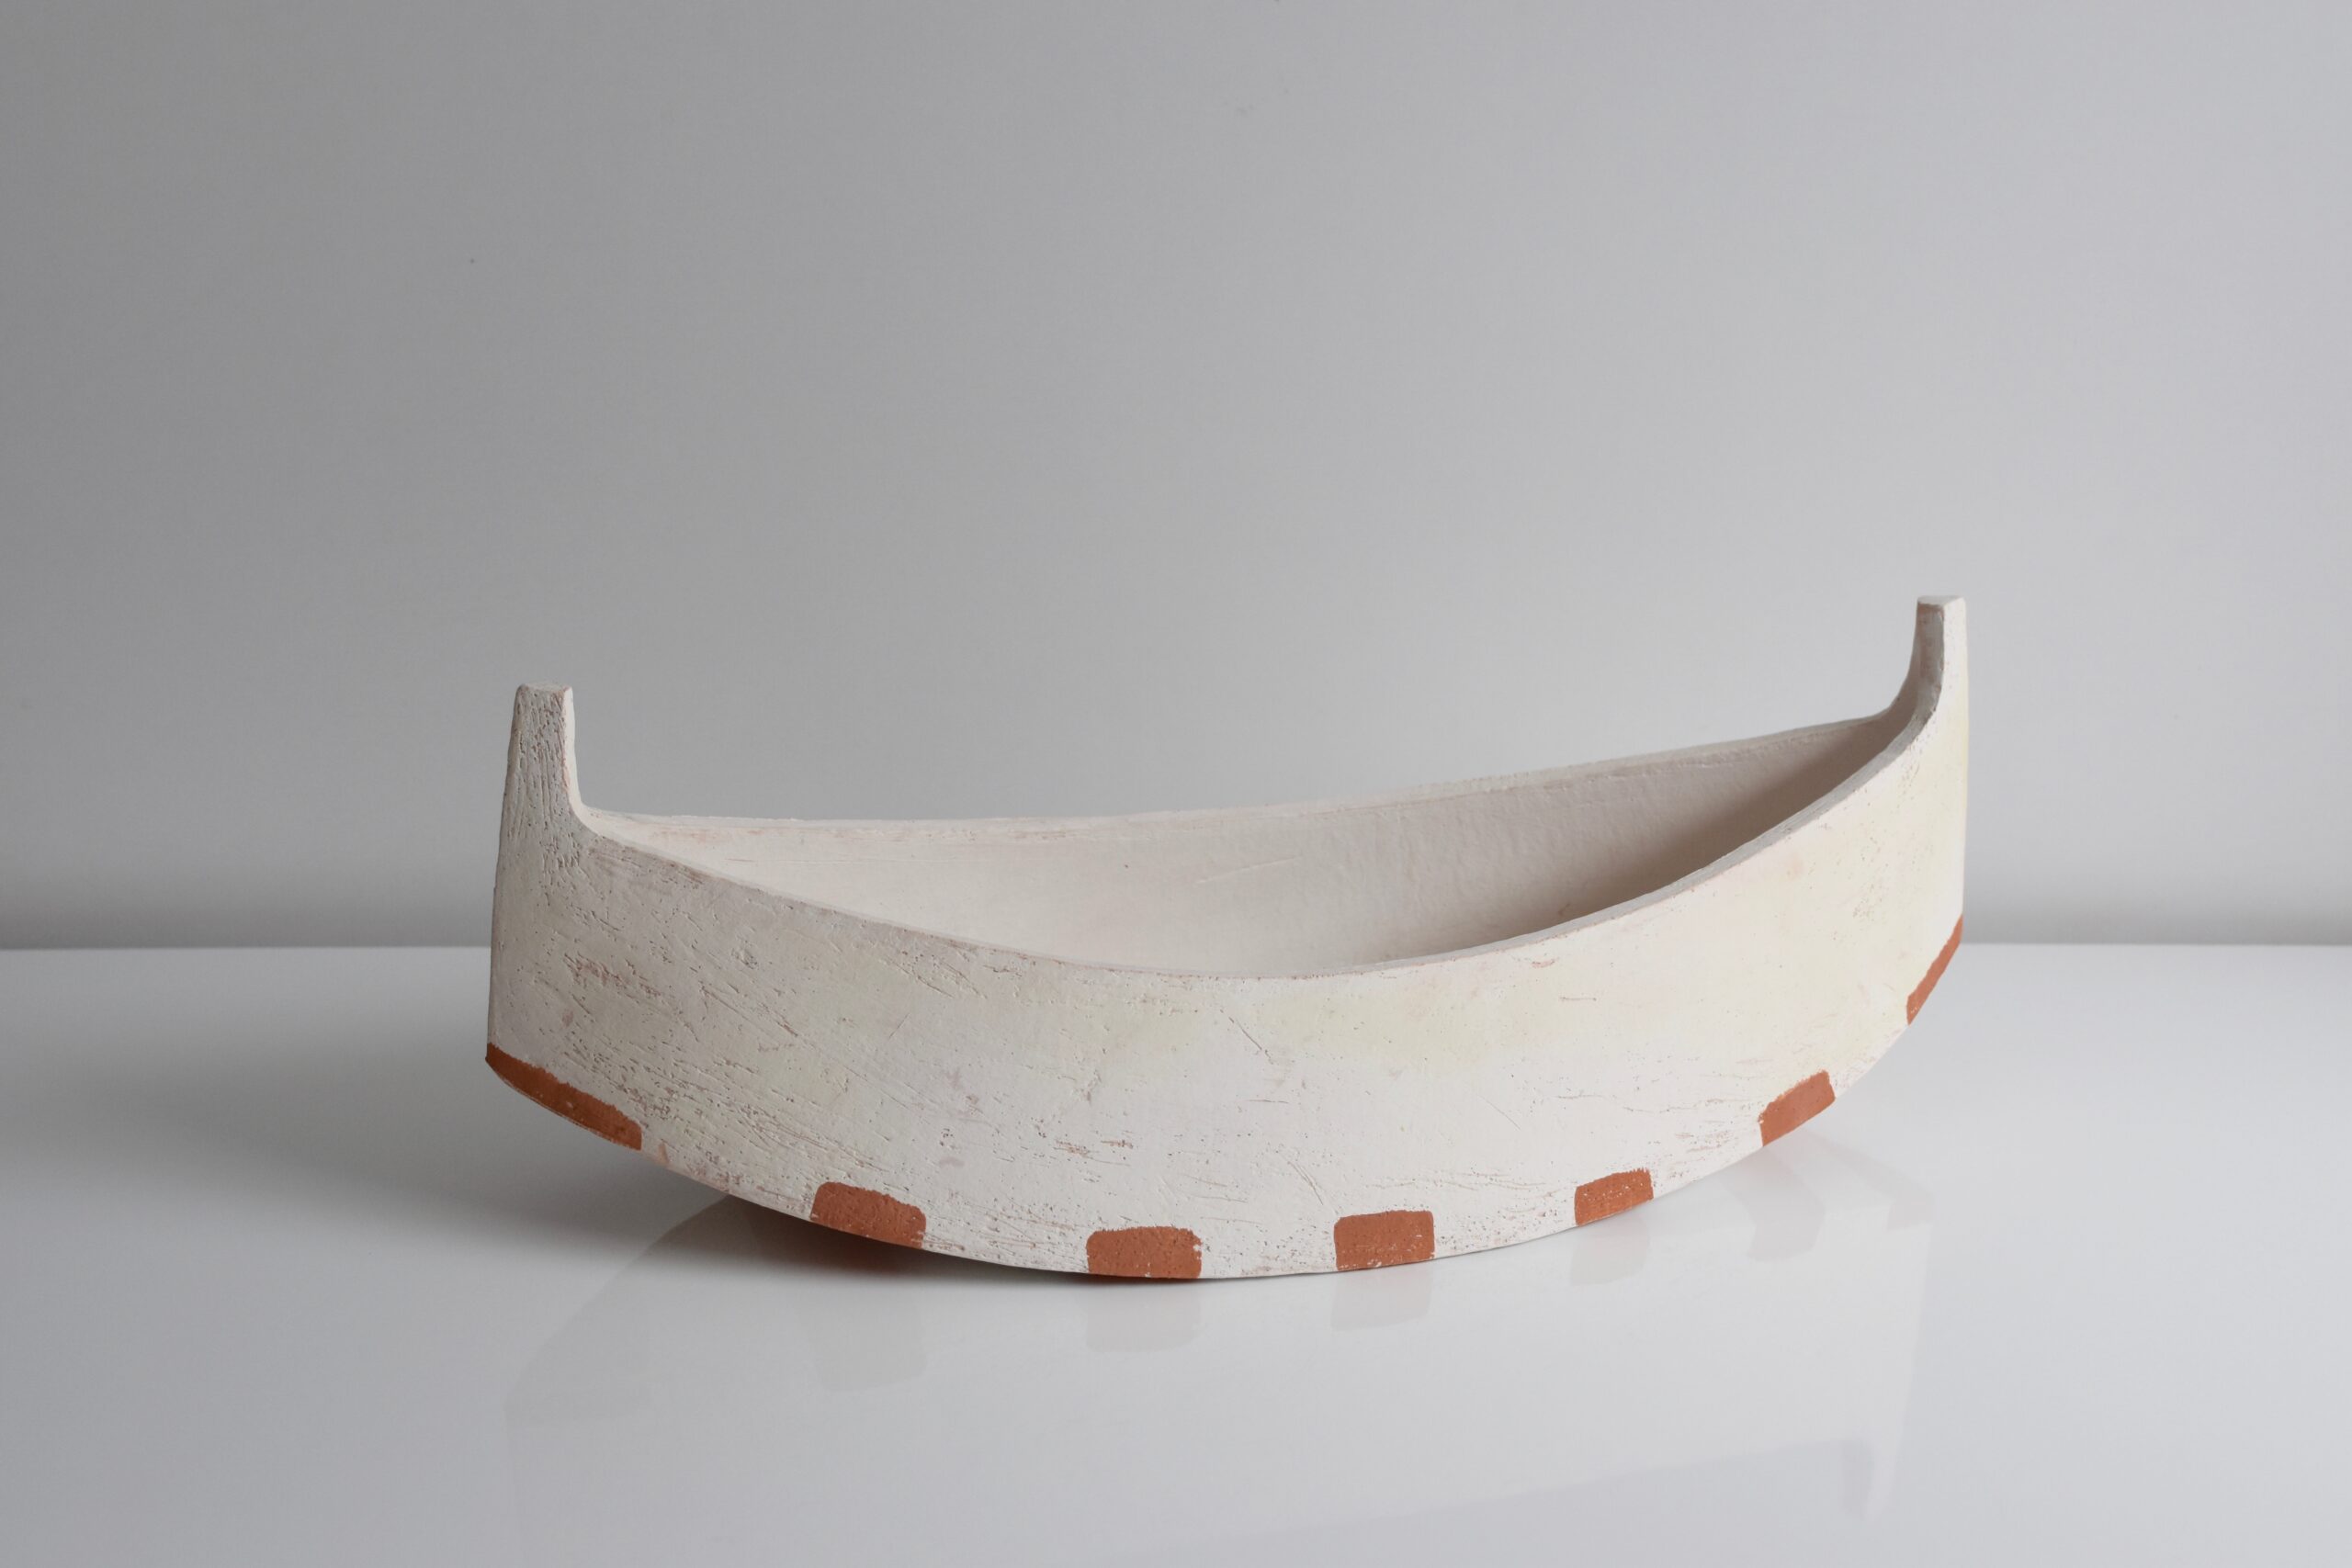 Boat (Shannon Tofts)